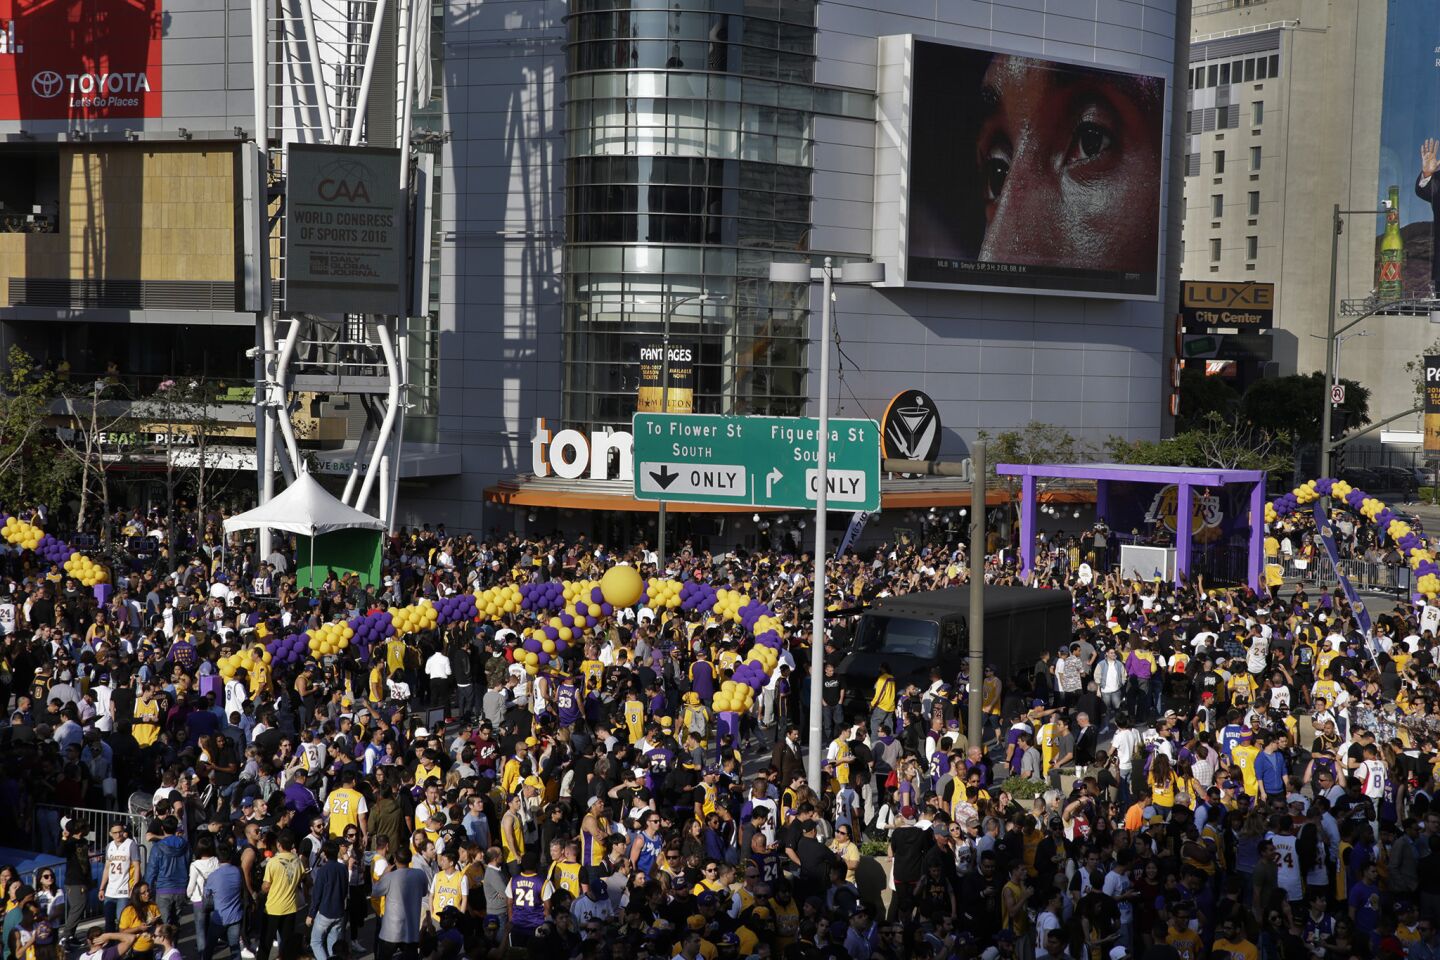 Chick Hearn Court is packed as fans descend on Staples Cener to witness Kobe Bryant play his last game as a Los Angeles Laker against the Utah Jazz.